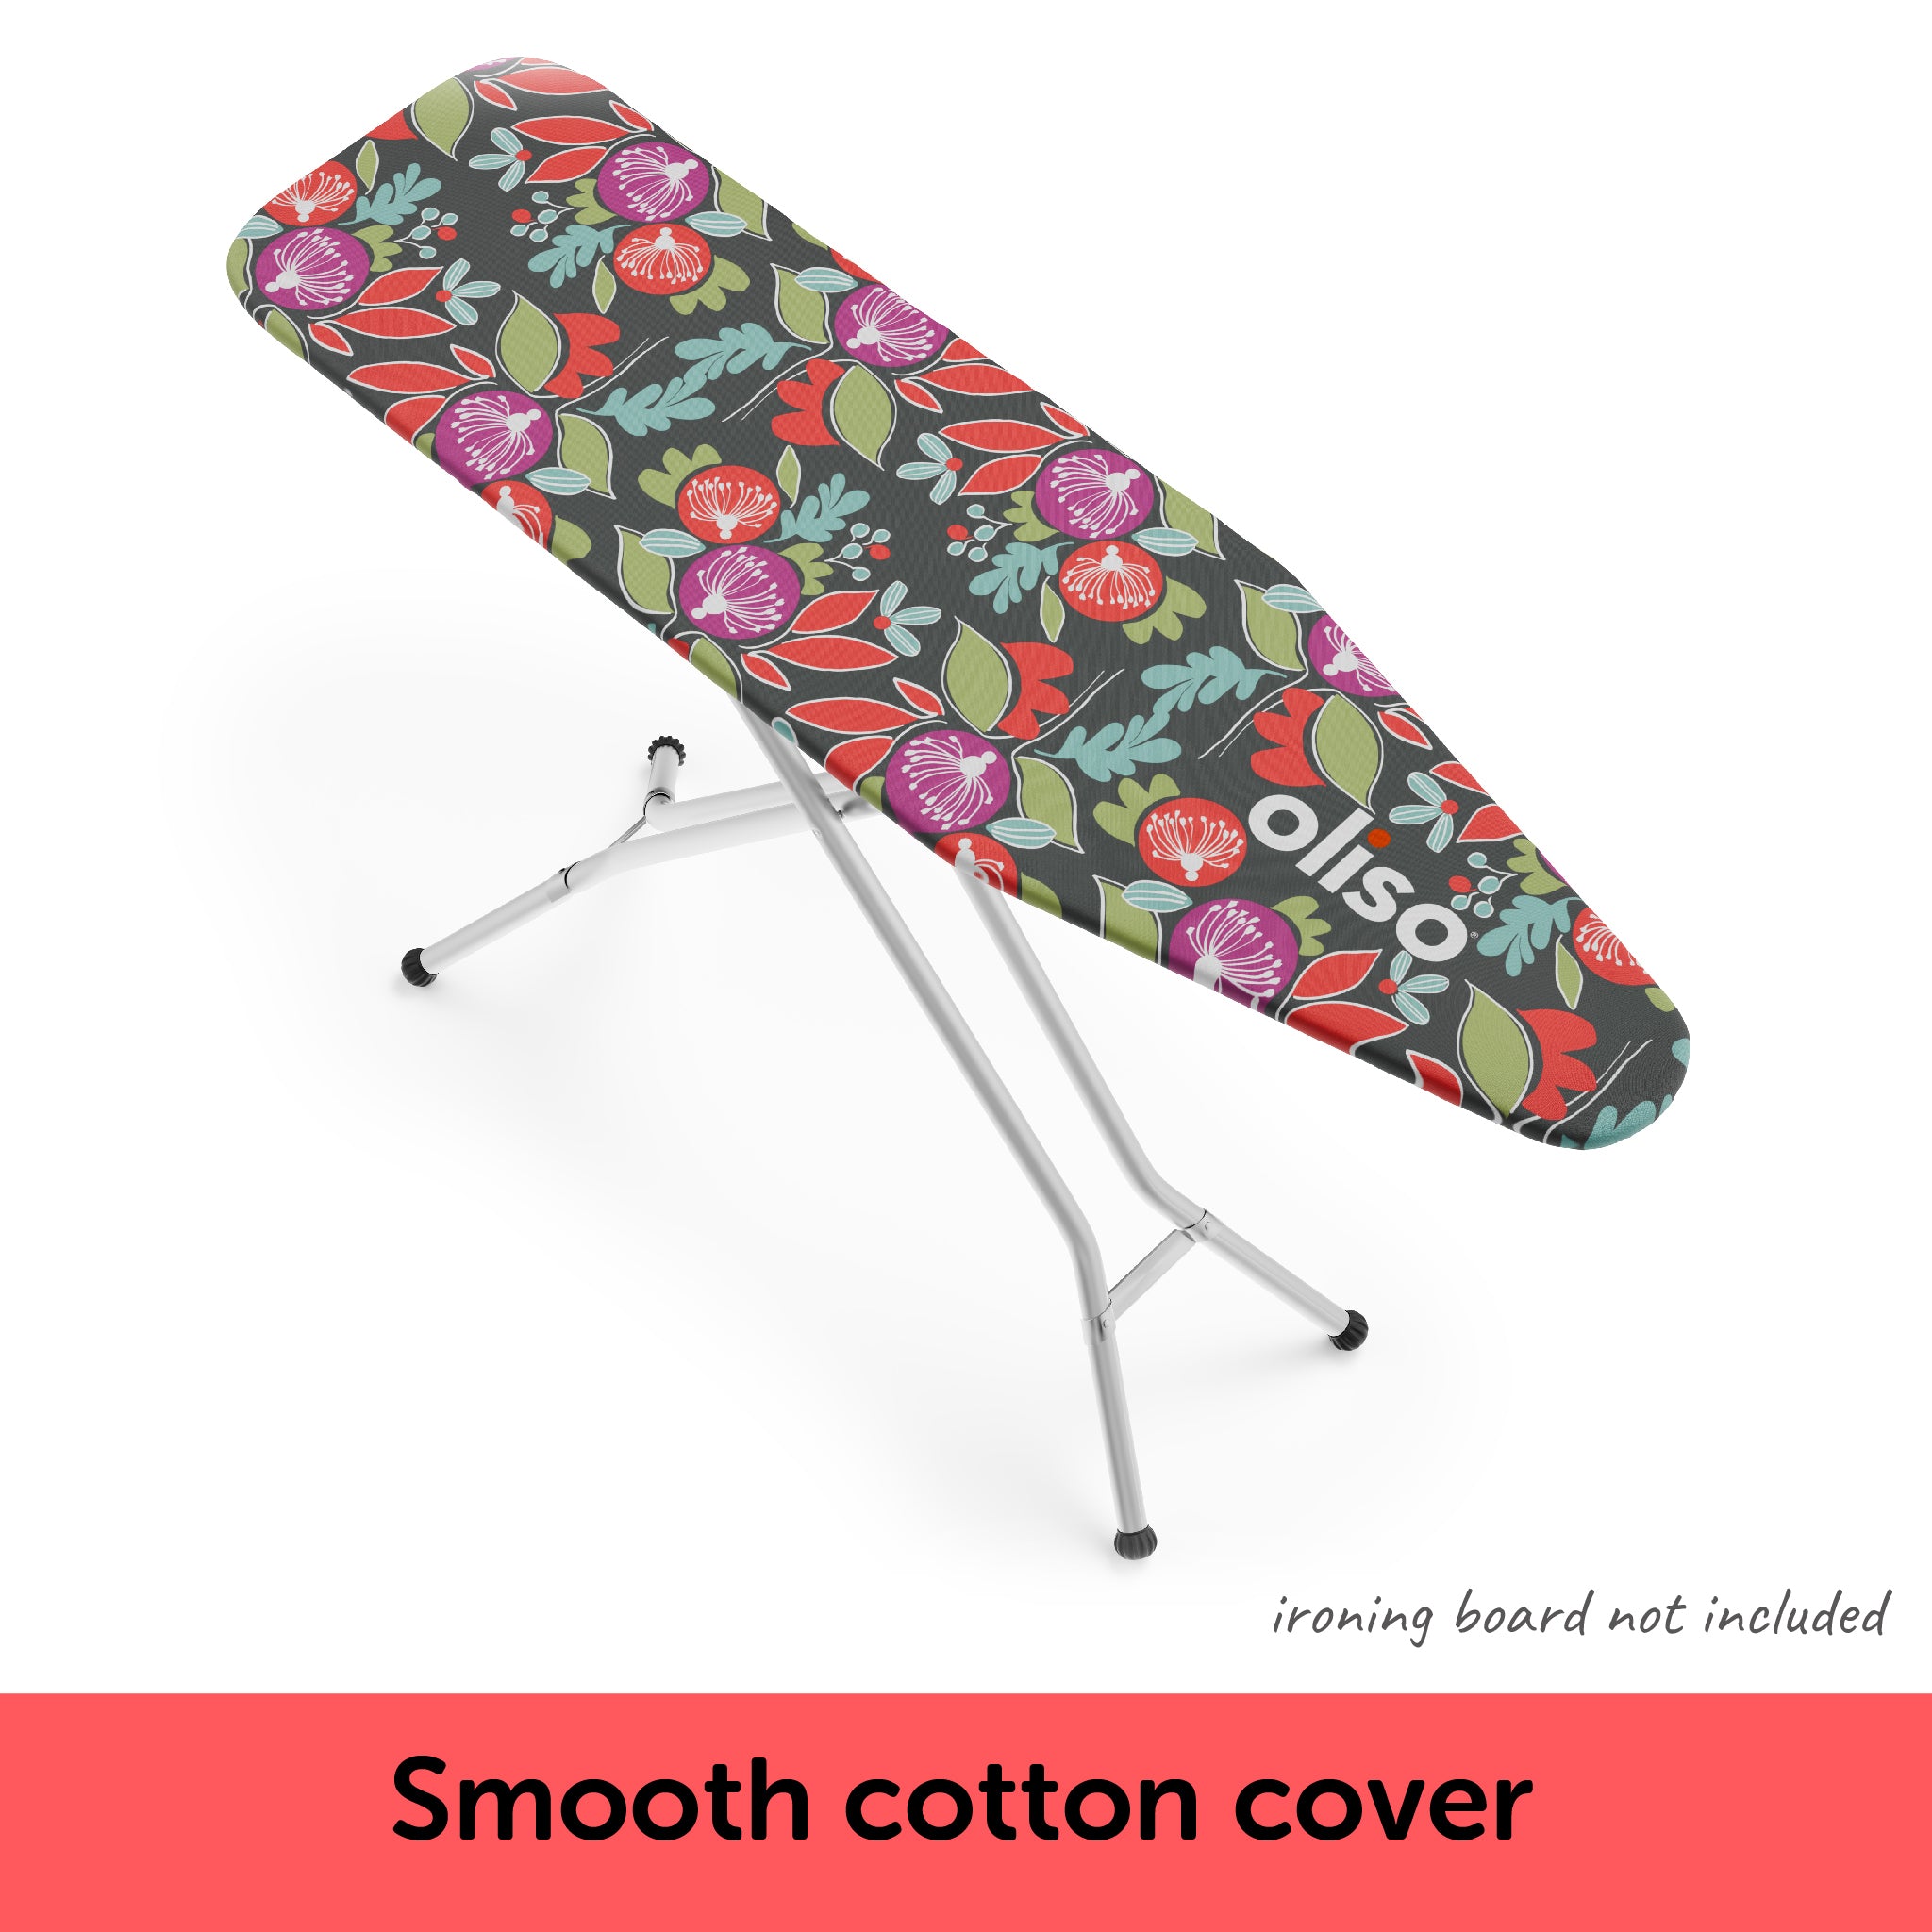 The Oliso ironing board cotton cover provides a smooth, firm surface, ideal for pressing and ironing.